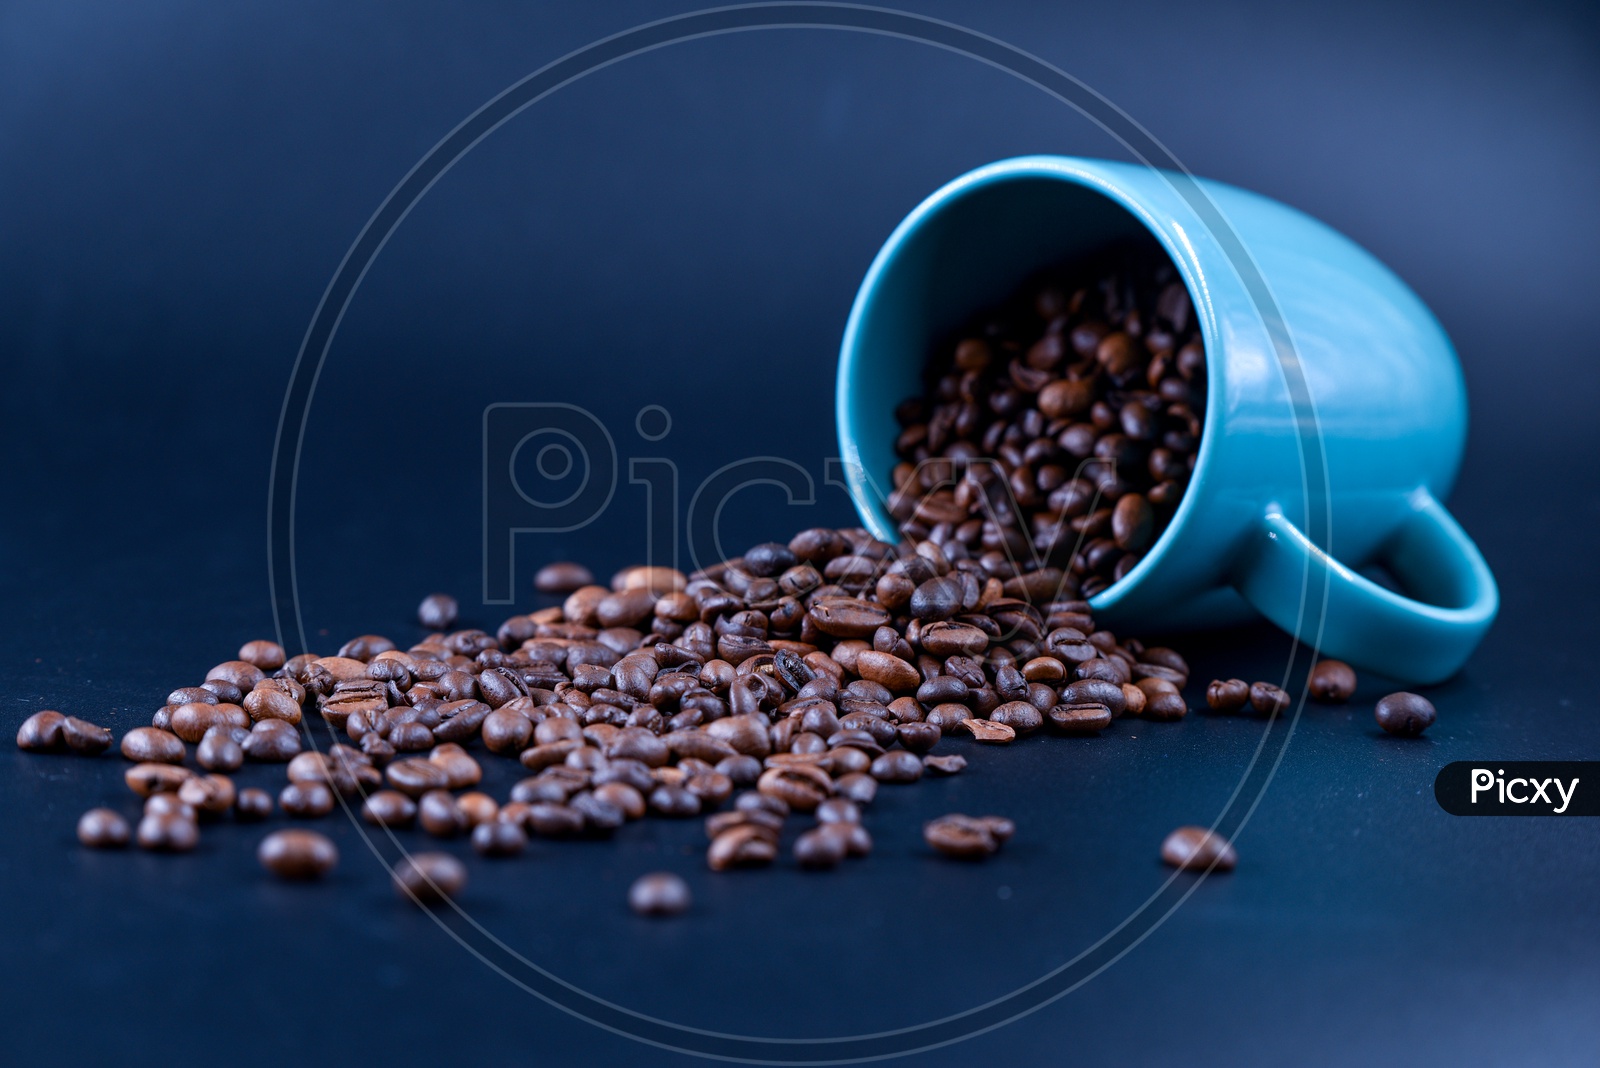 Coffee beans spilling out of a blue coffee mug on a dark background